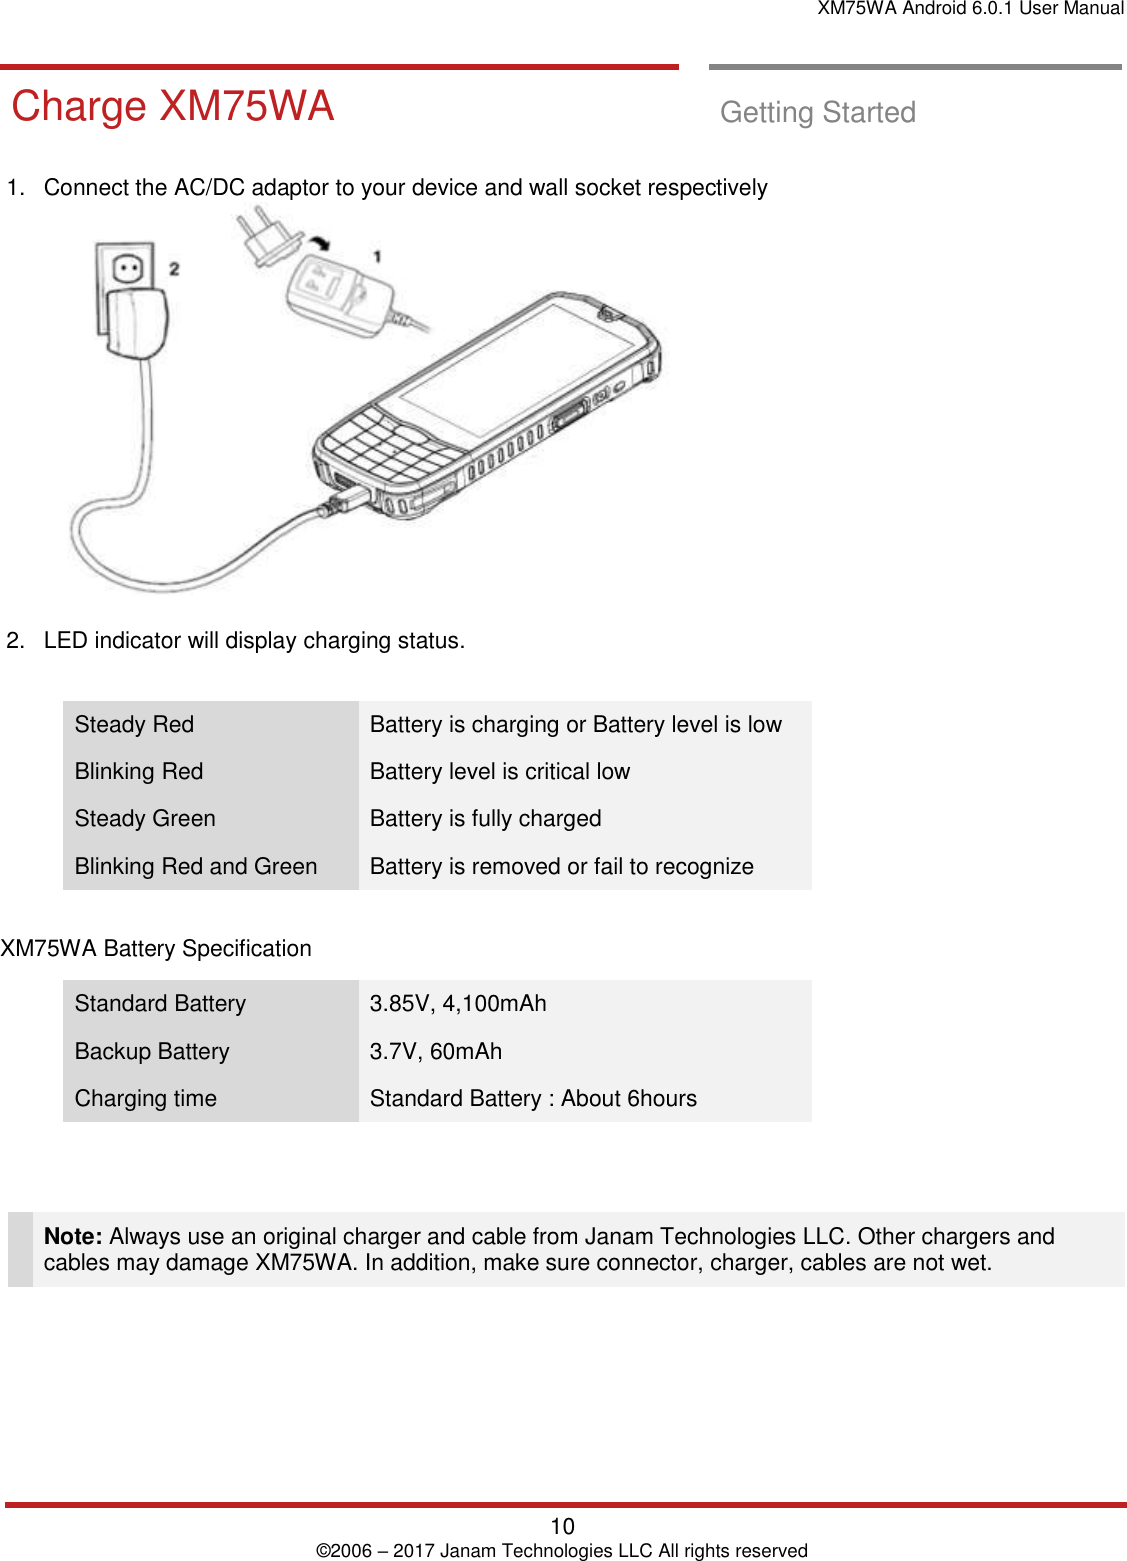 XM75WA Android 6.0.1 User Manual   10 © 2006 – 2017 Janam Technologies LLC All rights reserved  Getting Started       Charge XM75WA  Charge XM75WA  Getting Started  1.  Connect the AC/DC adaptor to your device and wall socket respectively    2.  LED indicator will display charging status.  Steady Red Battery is charging or Battery level is low Blinking Red Battery level is critical low Steady Green Battery is fully charged Blinking Red and Green Battery is removed or fail to recognize  XM75WA Battery Specification  Standard Battery  3.85V, 4,100mAh Backup Battery  3.7V, 60mAh Charging time  Standard Battery : About 6hours    Note: Always use an original charger and cable from Janam Technologies LLC. Other chargers and cables may damage XM75WA. In addition, make sure connector, charger, cables are not wet.       